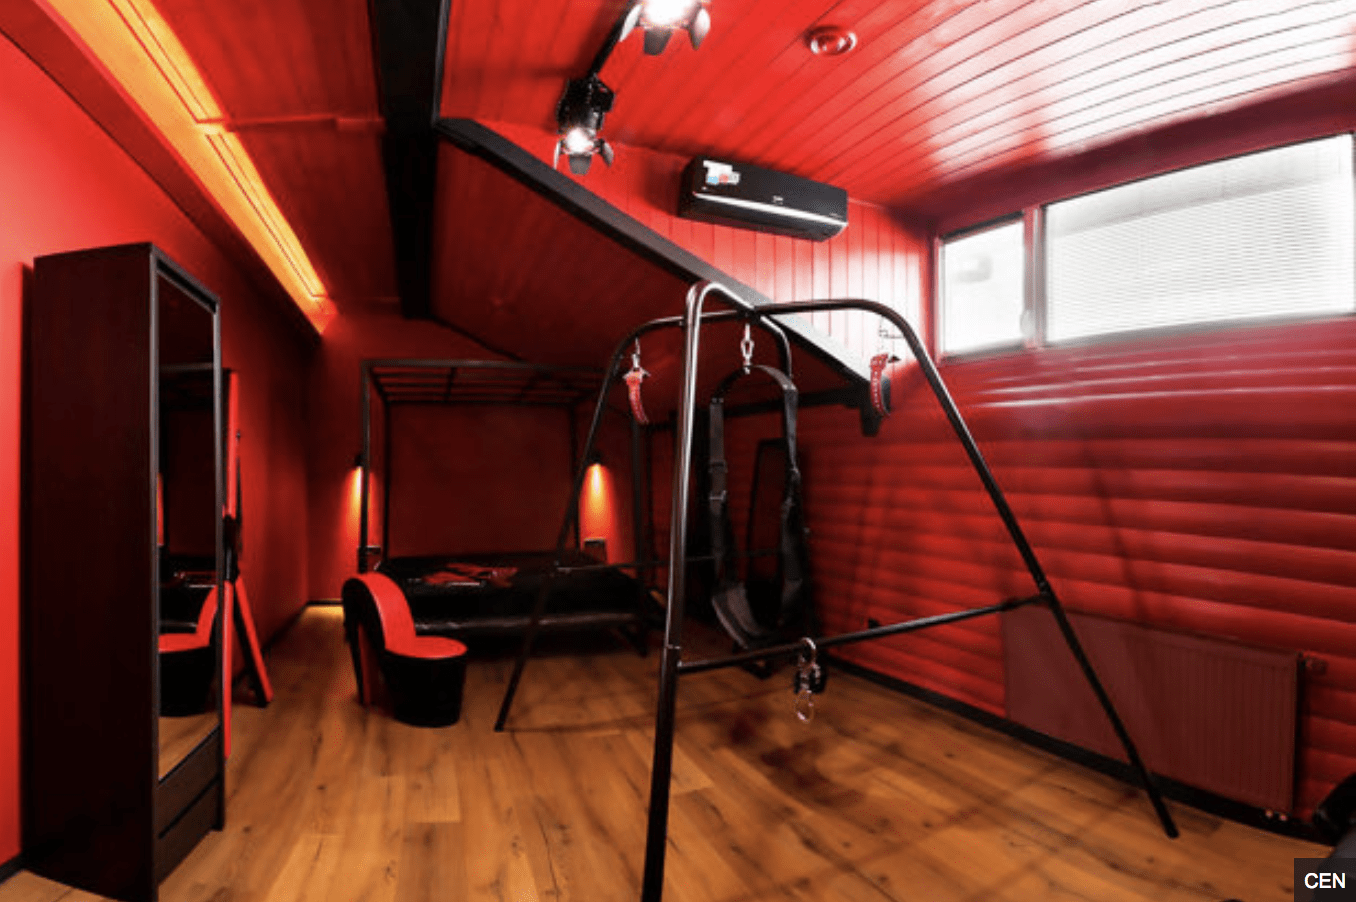 S&M Hotel For Kinky Couples Opens In Ukraine- red wall and furniture with wooden floors